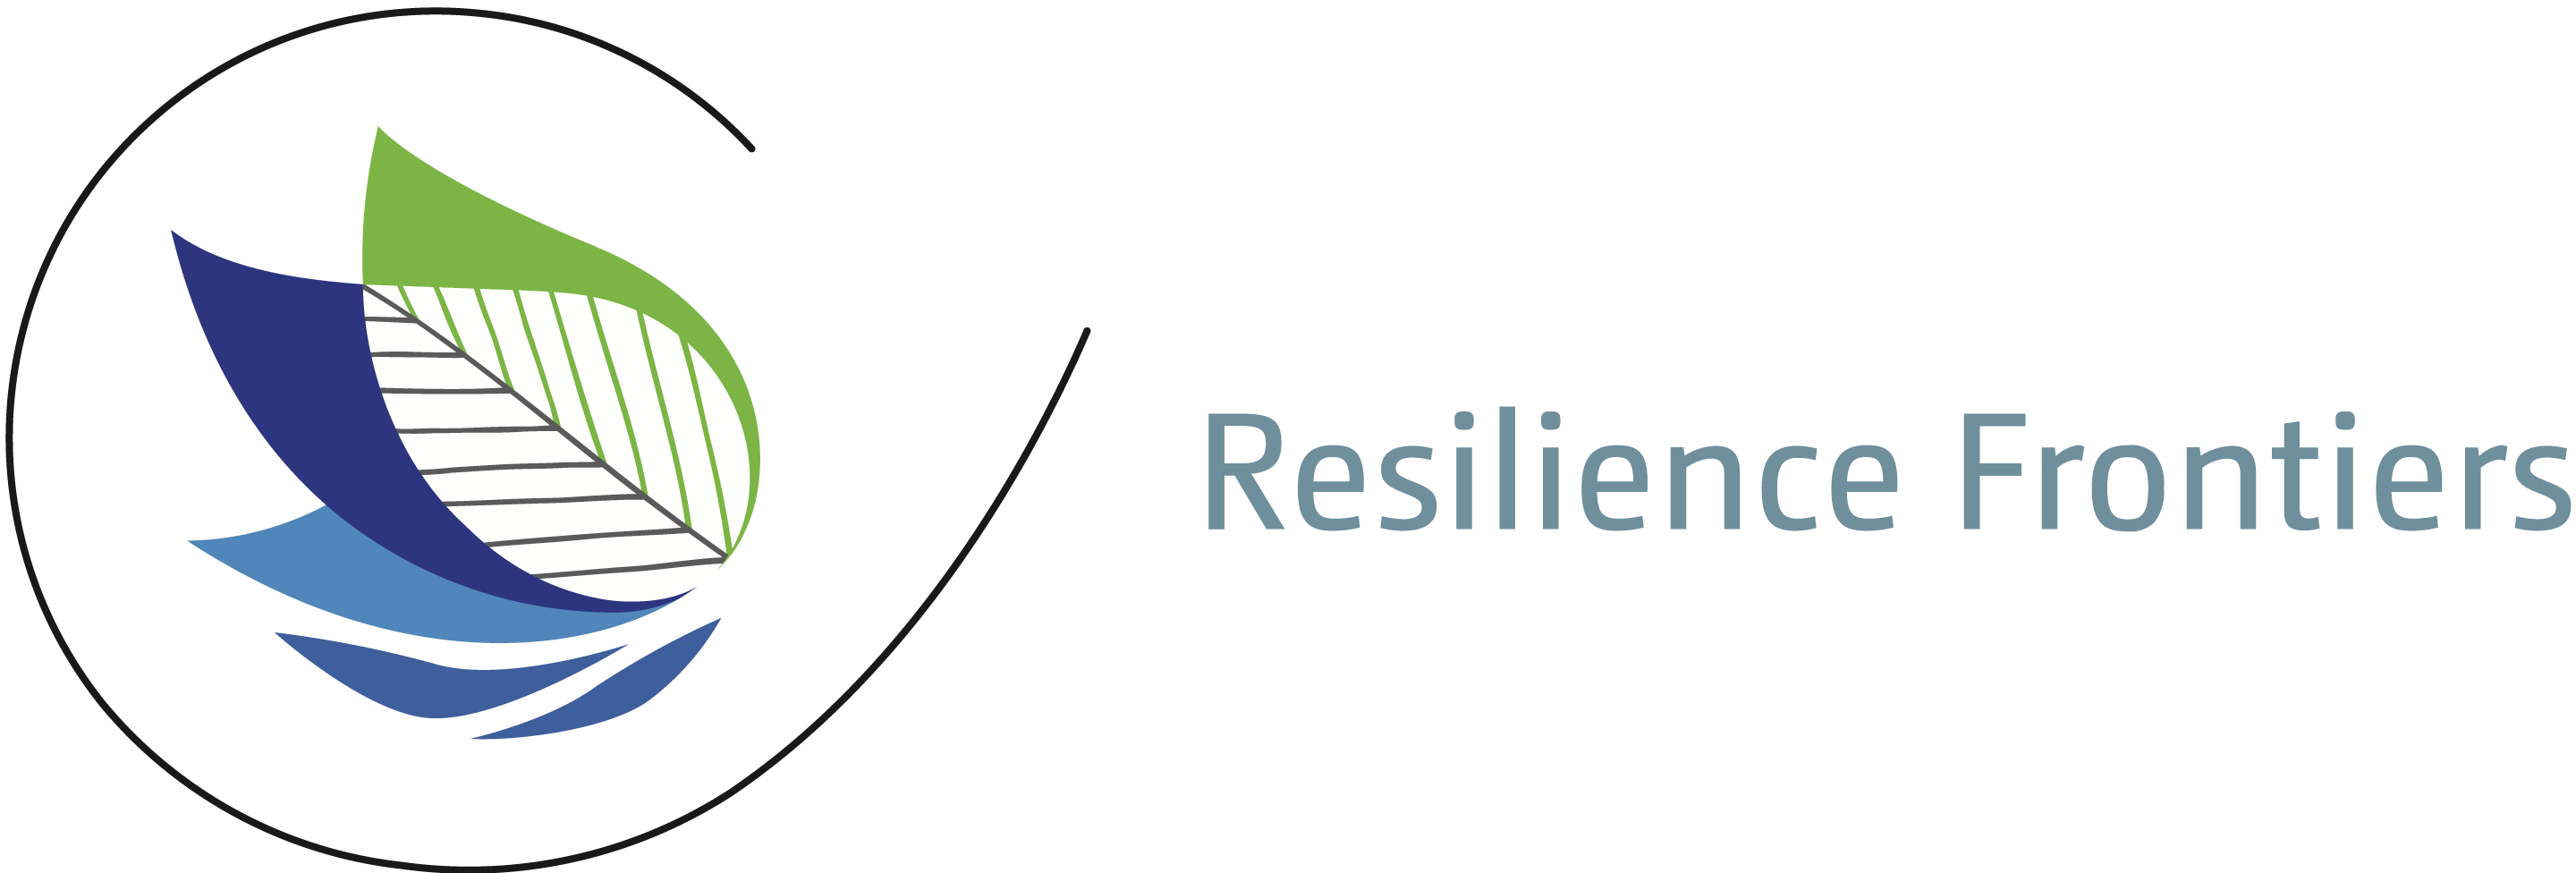 Resilience Frontiers logo